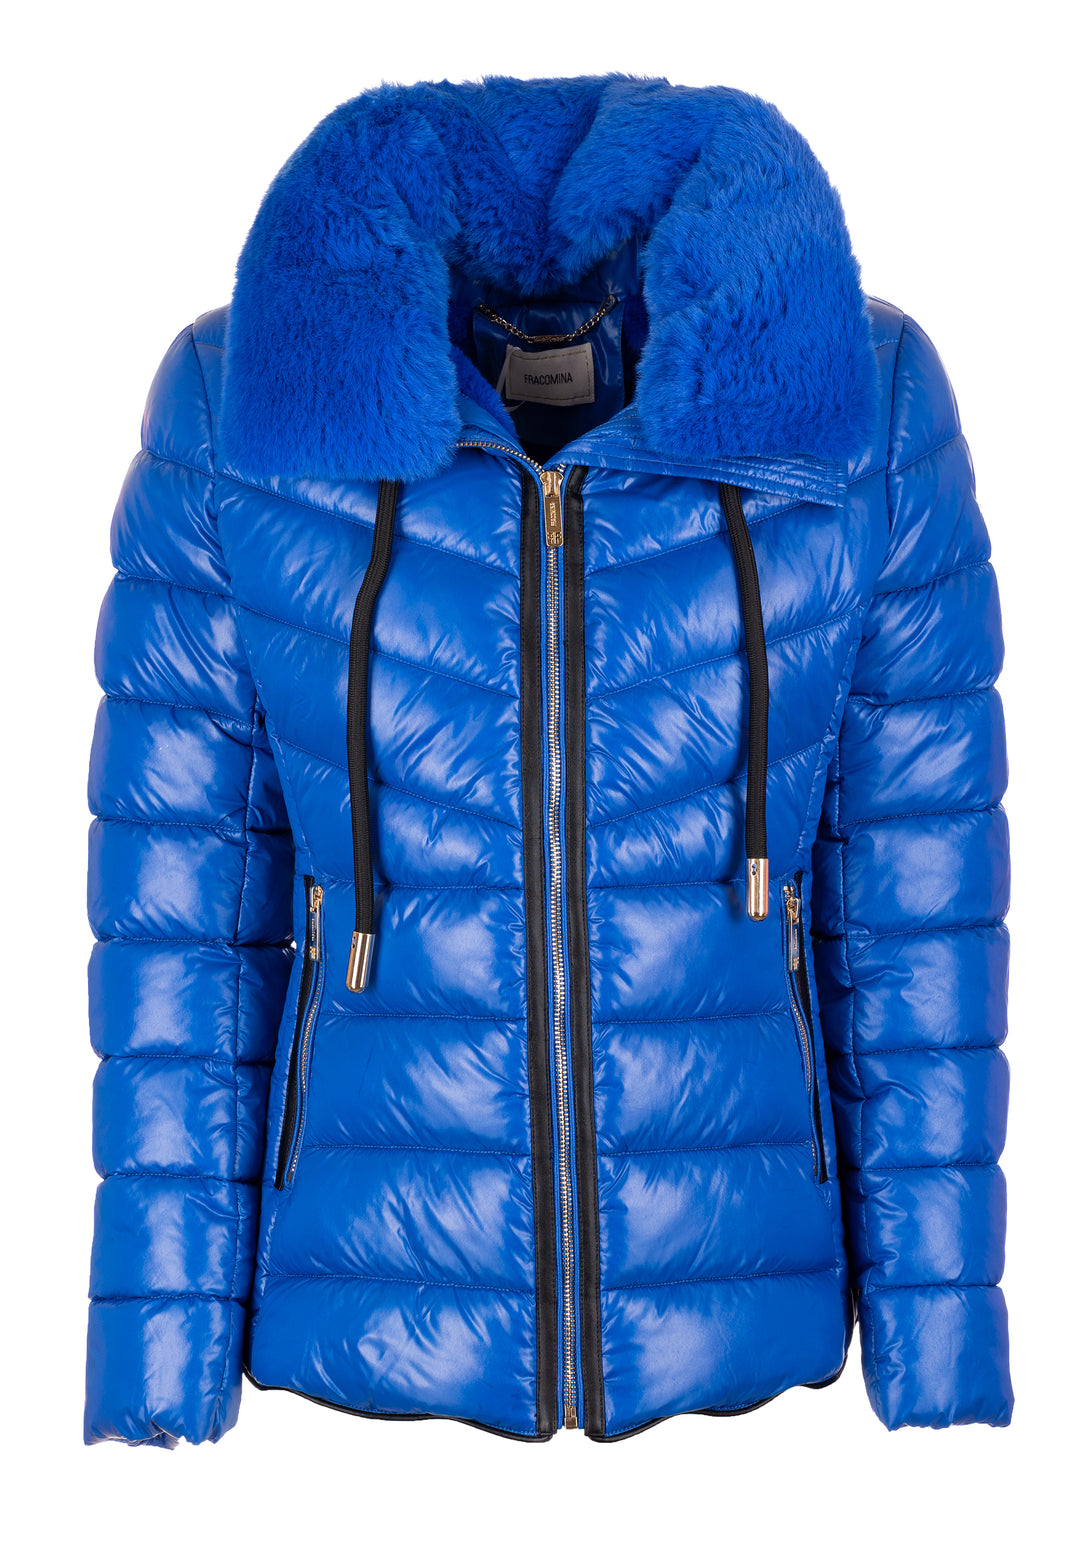 Padded jacket slim fit made in quilted nylon